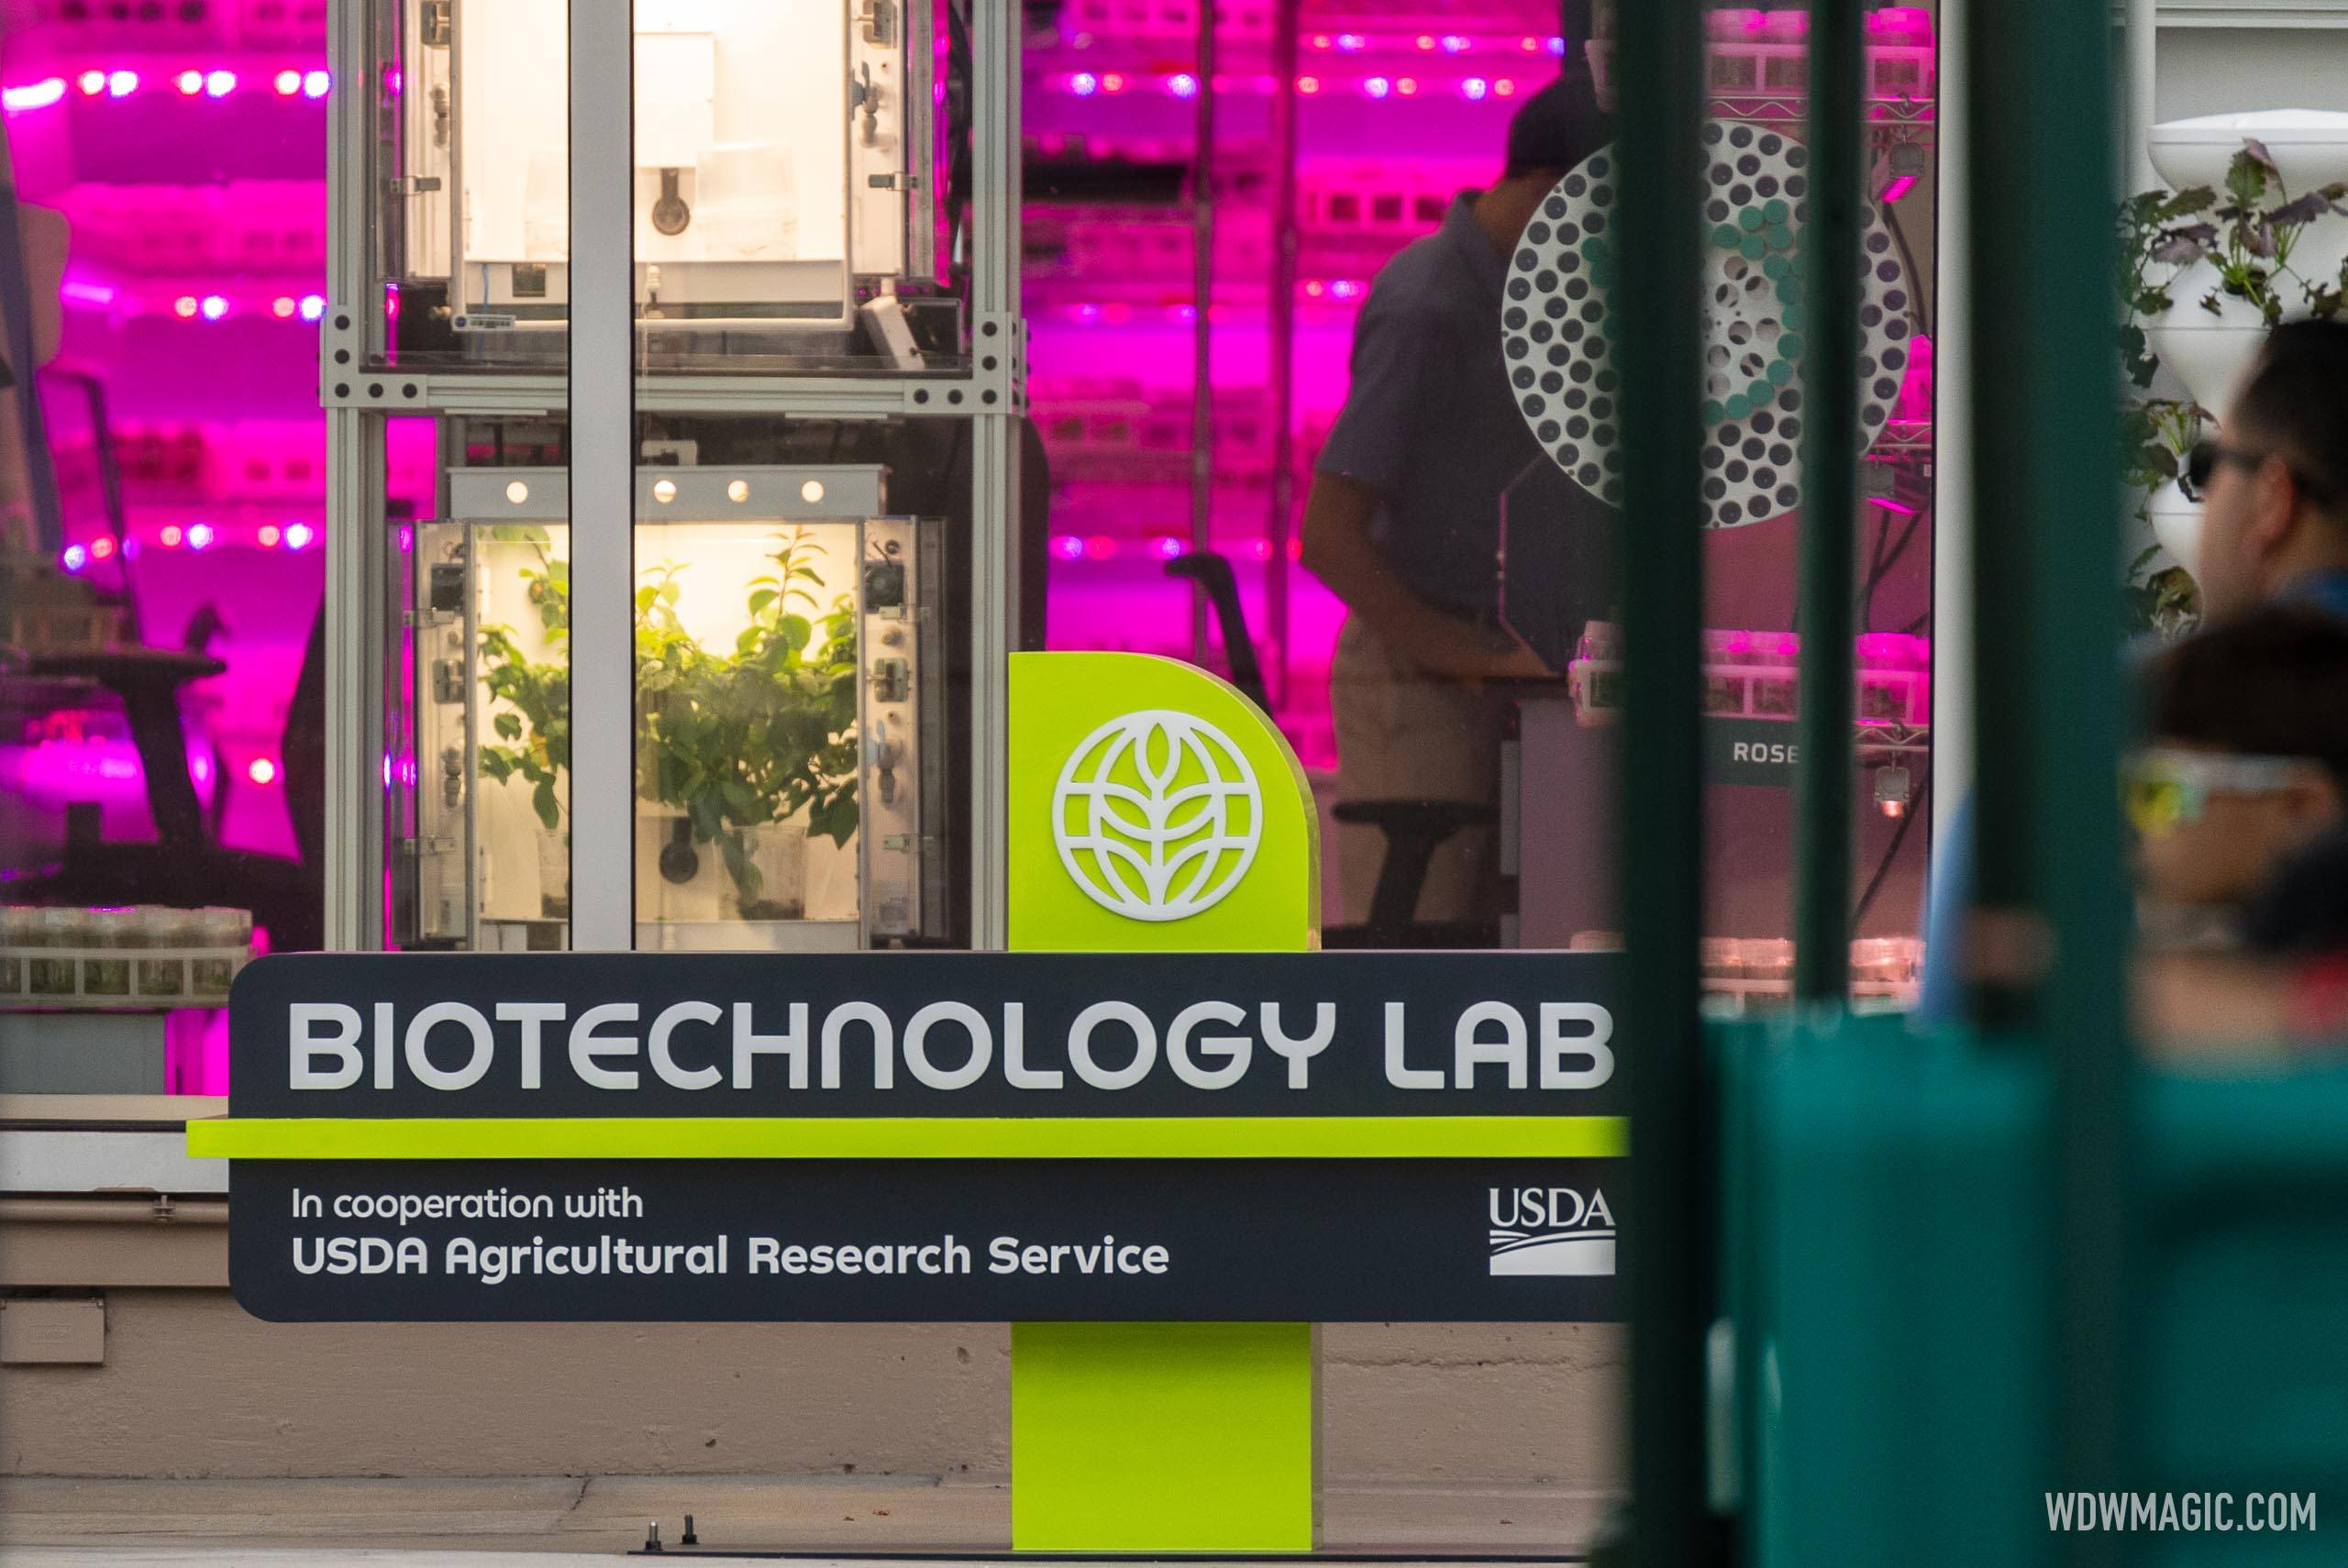 New Biotechnology Lab signage at Living with the Land